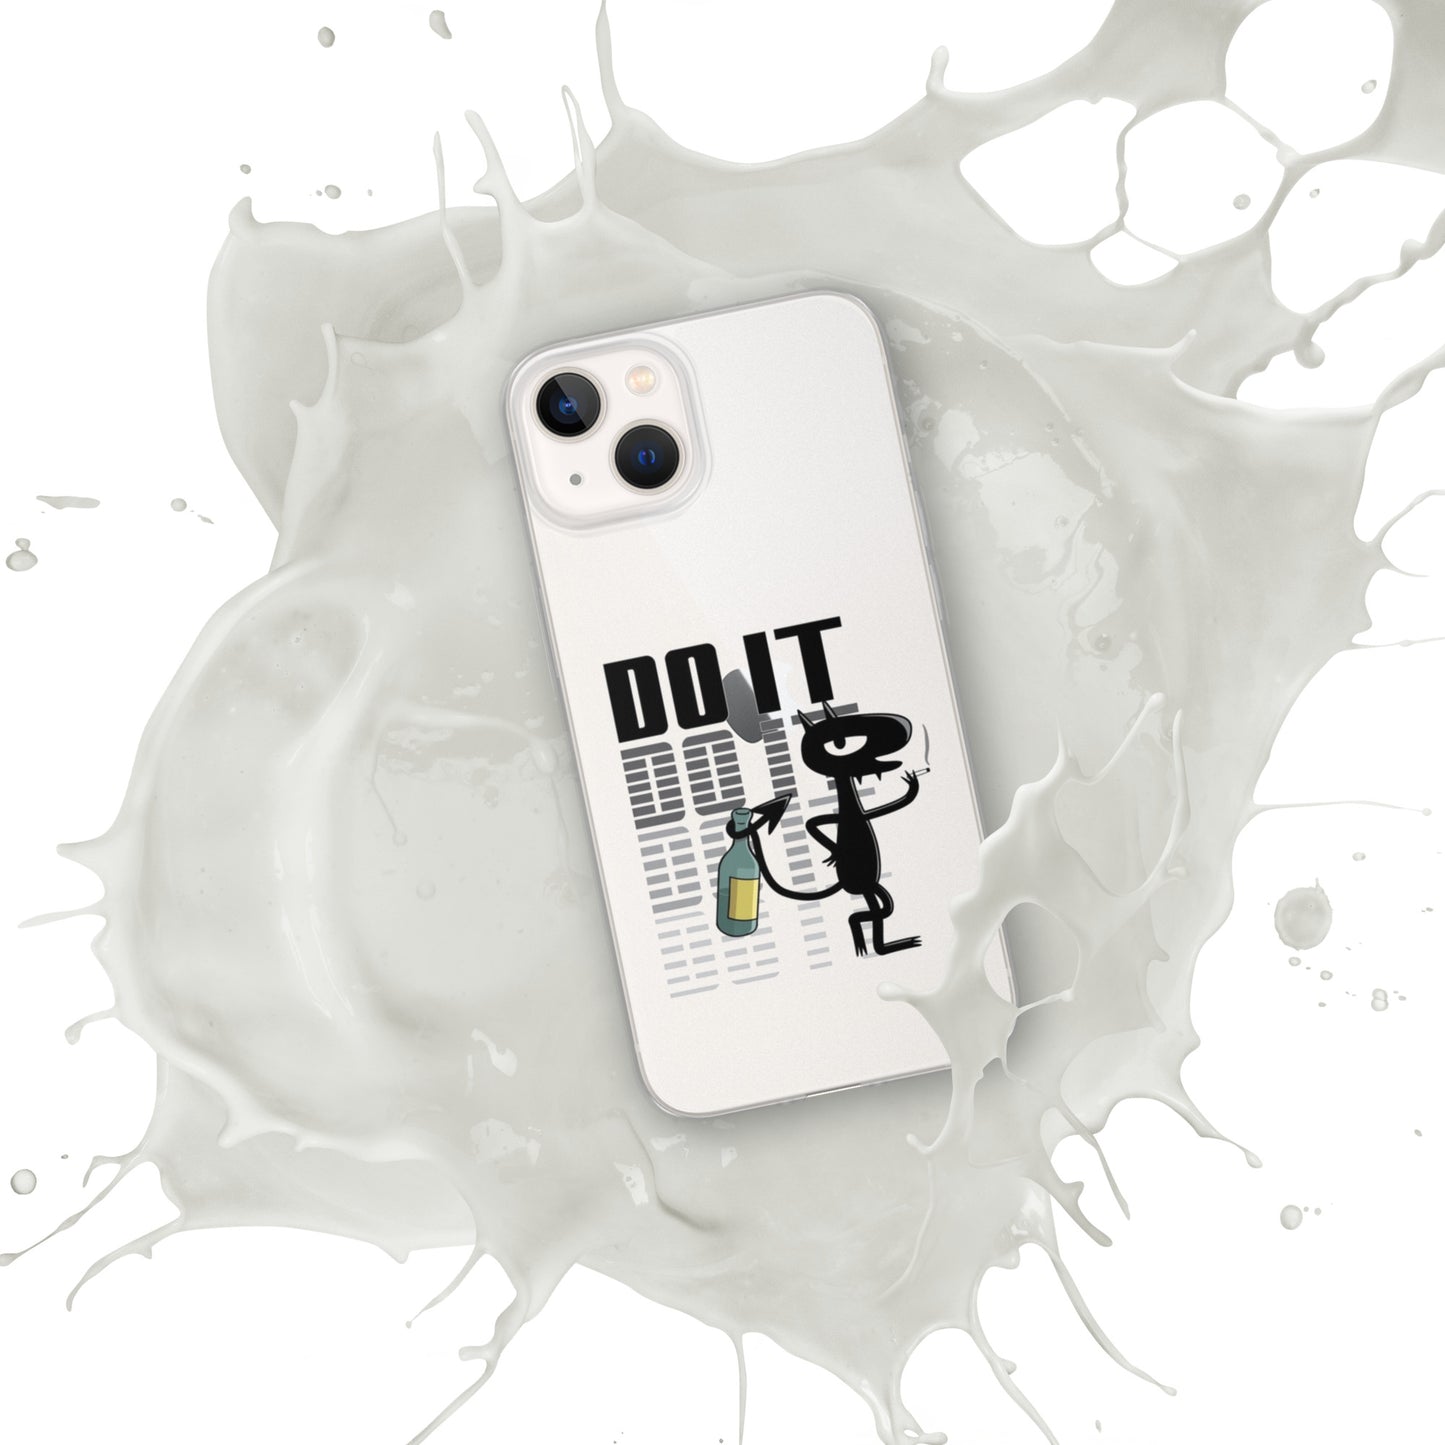 Case for iPhone Lucy do it Disenchantment DrinkandArt